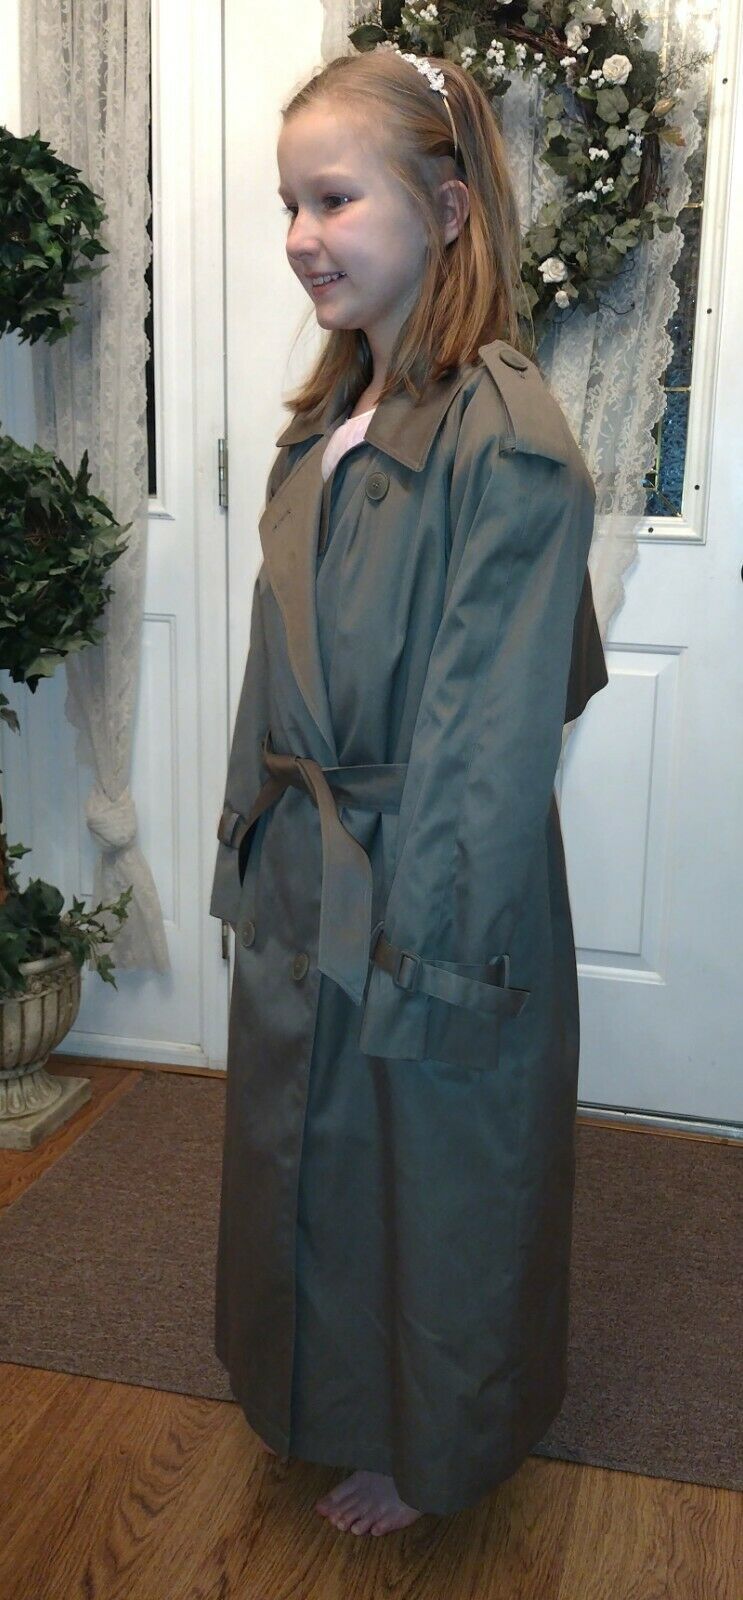 Primary image for Vintage John Weitz Green Trench Coat 20P Removable Lining Belted at Waist & Cuff